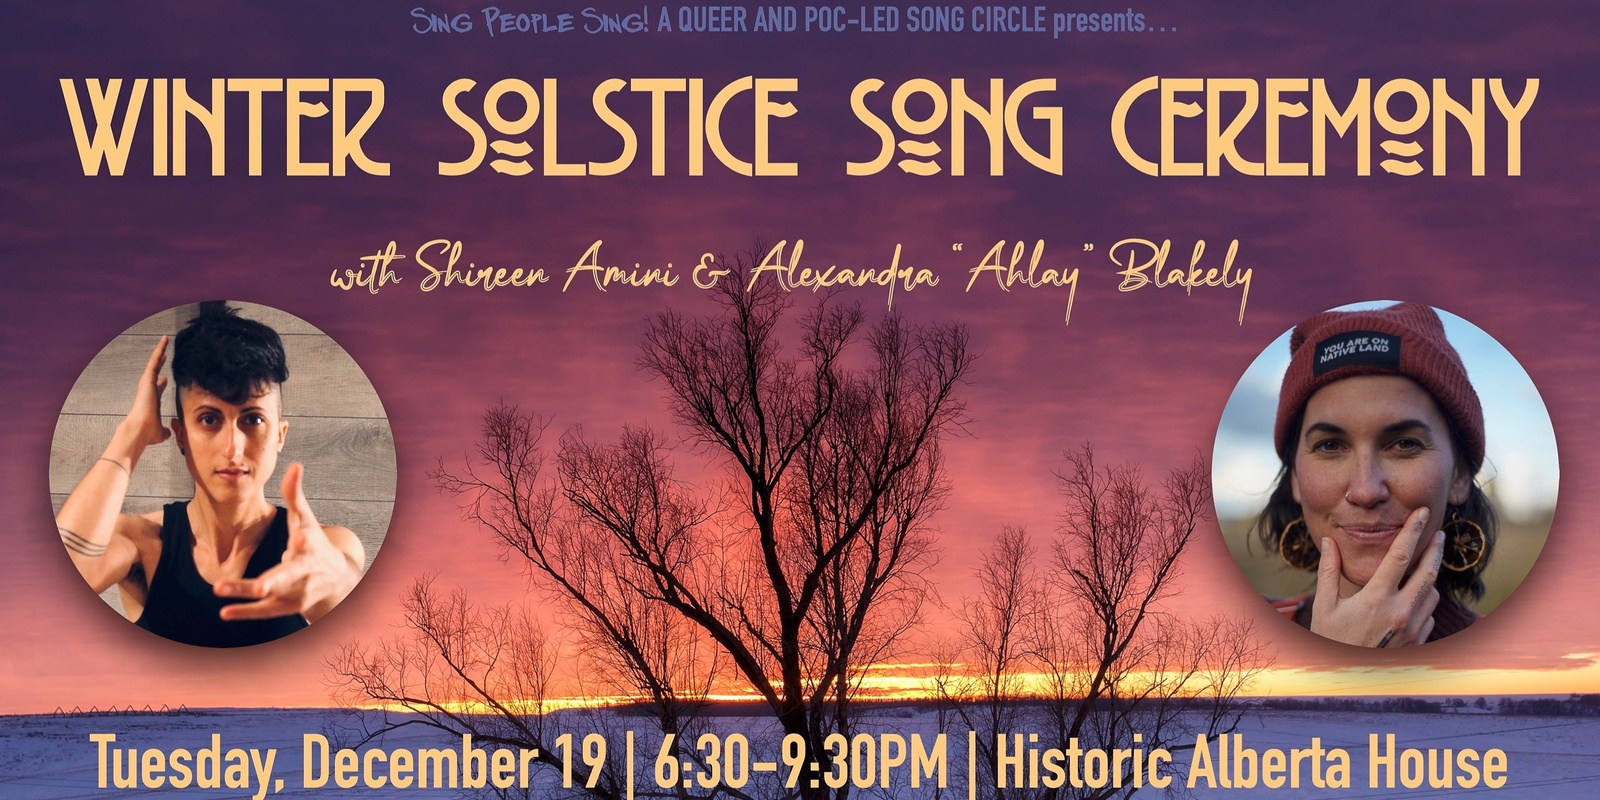 Banner image for Winter Solstice Song Ceremony in PDX